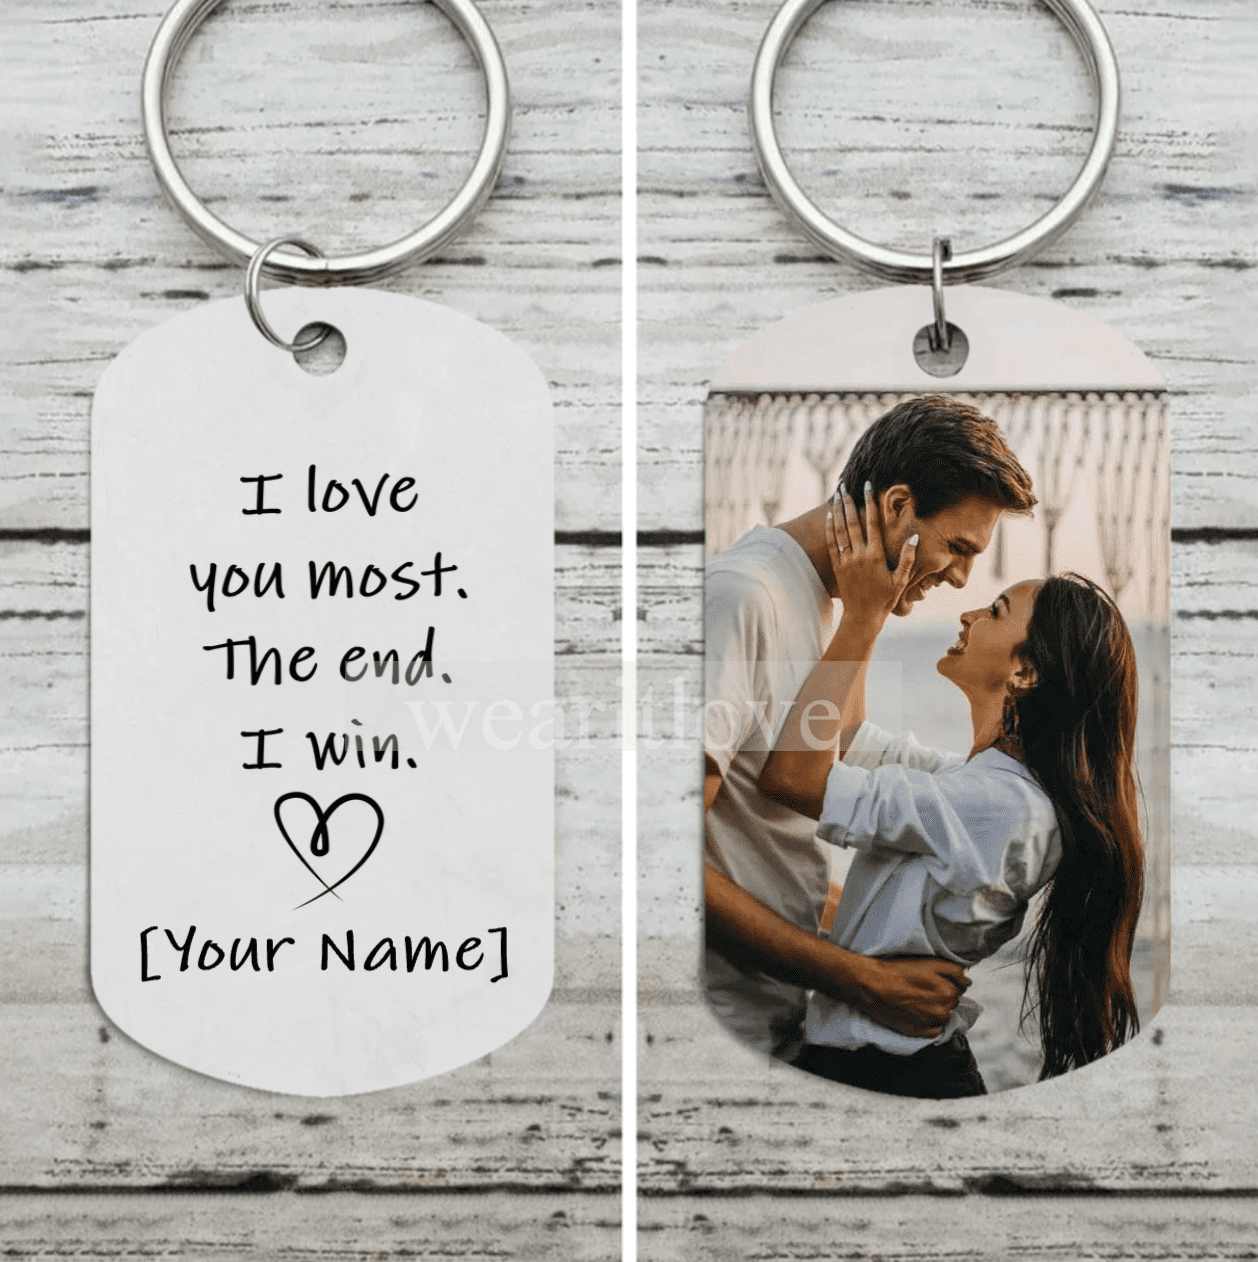 Wearitlove™ Personalized Photo Keychain - Best Gift for Your Loved Ones